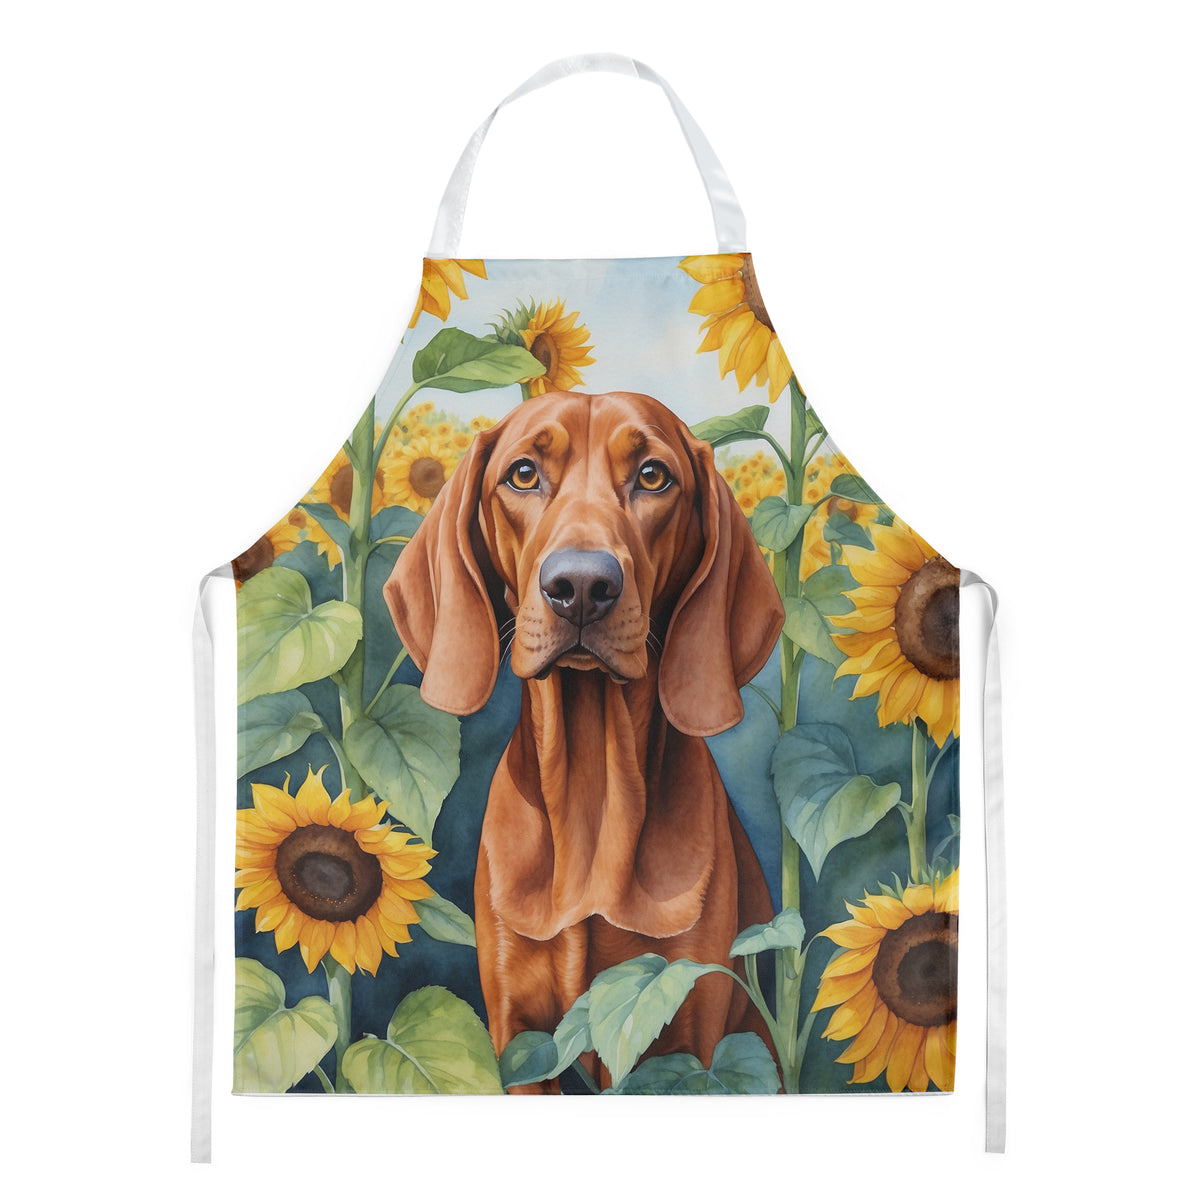 Buy this Redbone Coonhound in Sunflowers Apron